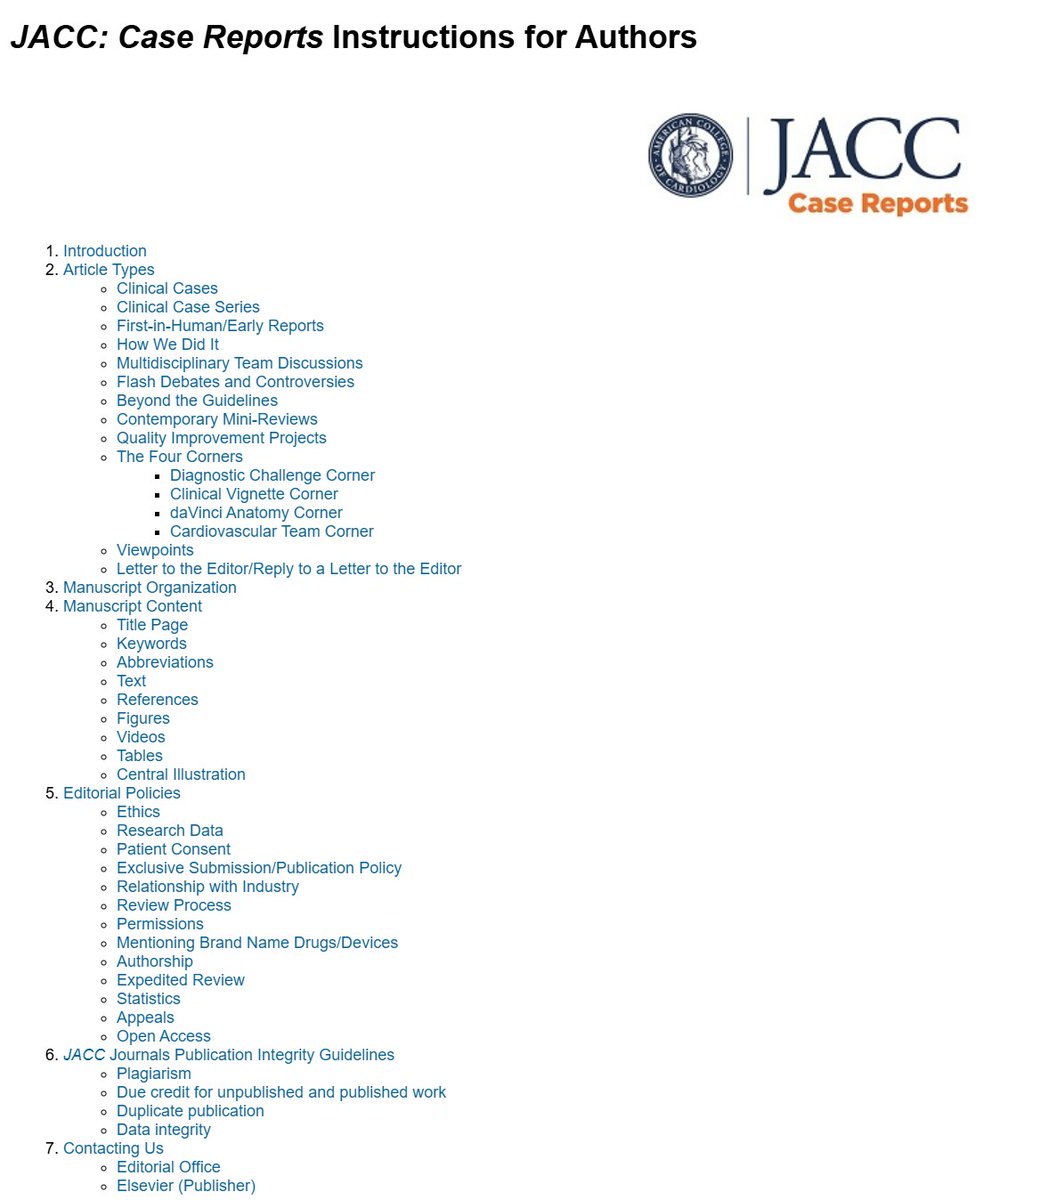 JUST OUT @JACCJournals #JACCCaseReports NEW Instructions for Authors! Submit for our Aug 7 1st issue with the new Ed Board! jaccsubmit-casereports.org/cgi-bin/main.p… @DeeDeeWangMD @MinnowWalsh